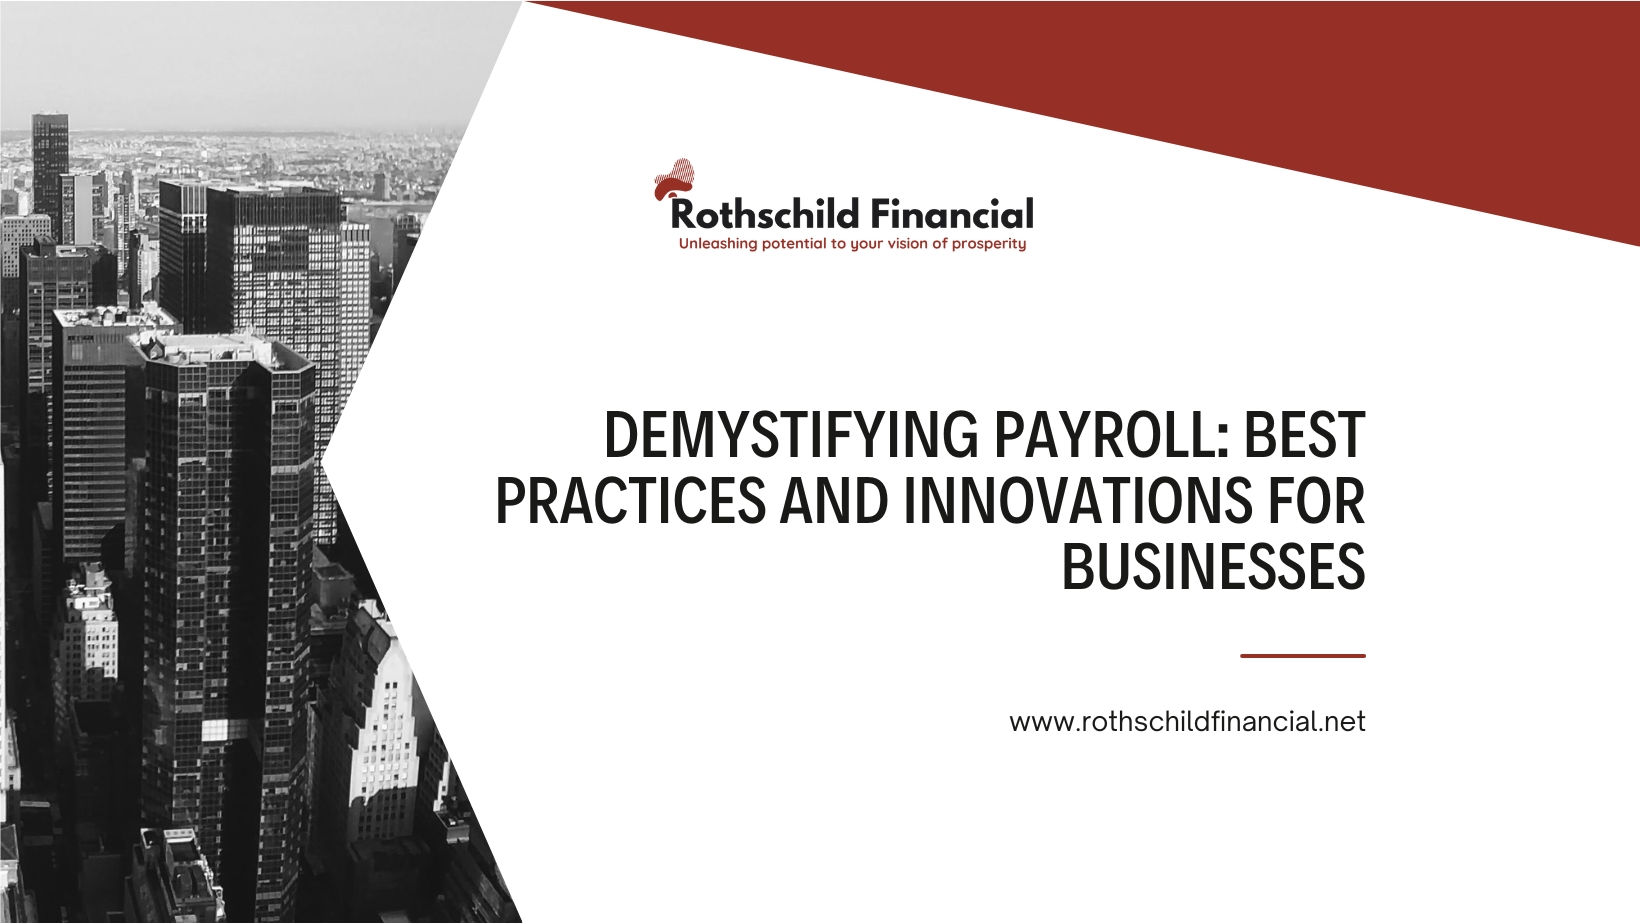 Demystifying Payroll- Best Practices and Innovations for Businesses